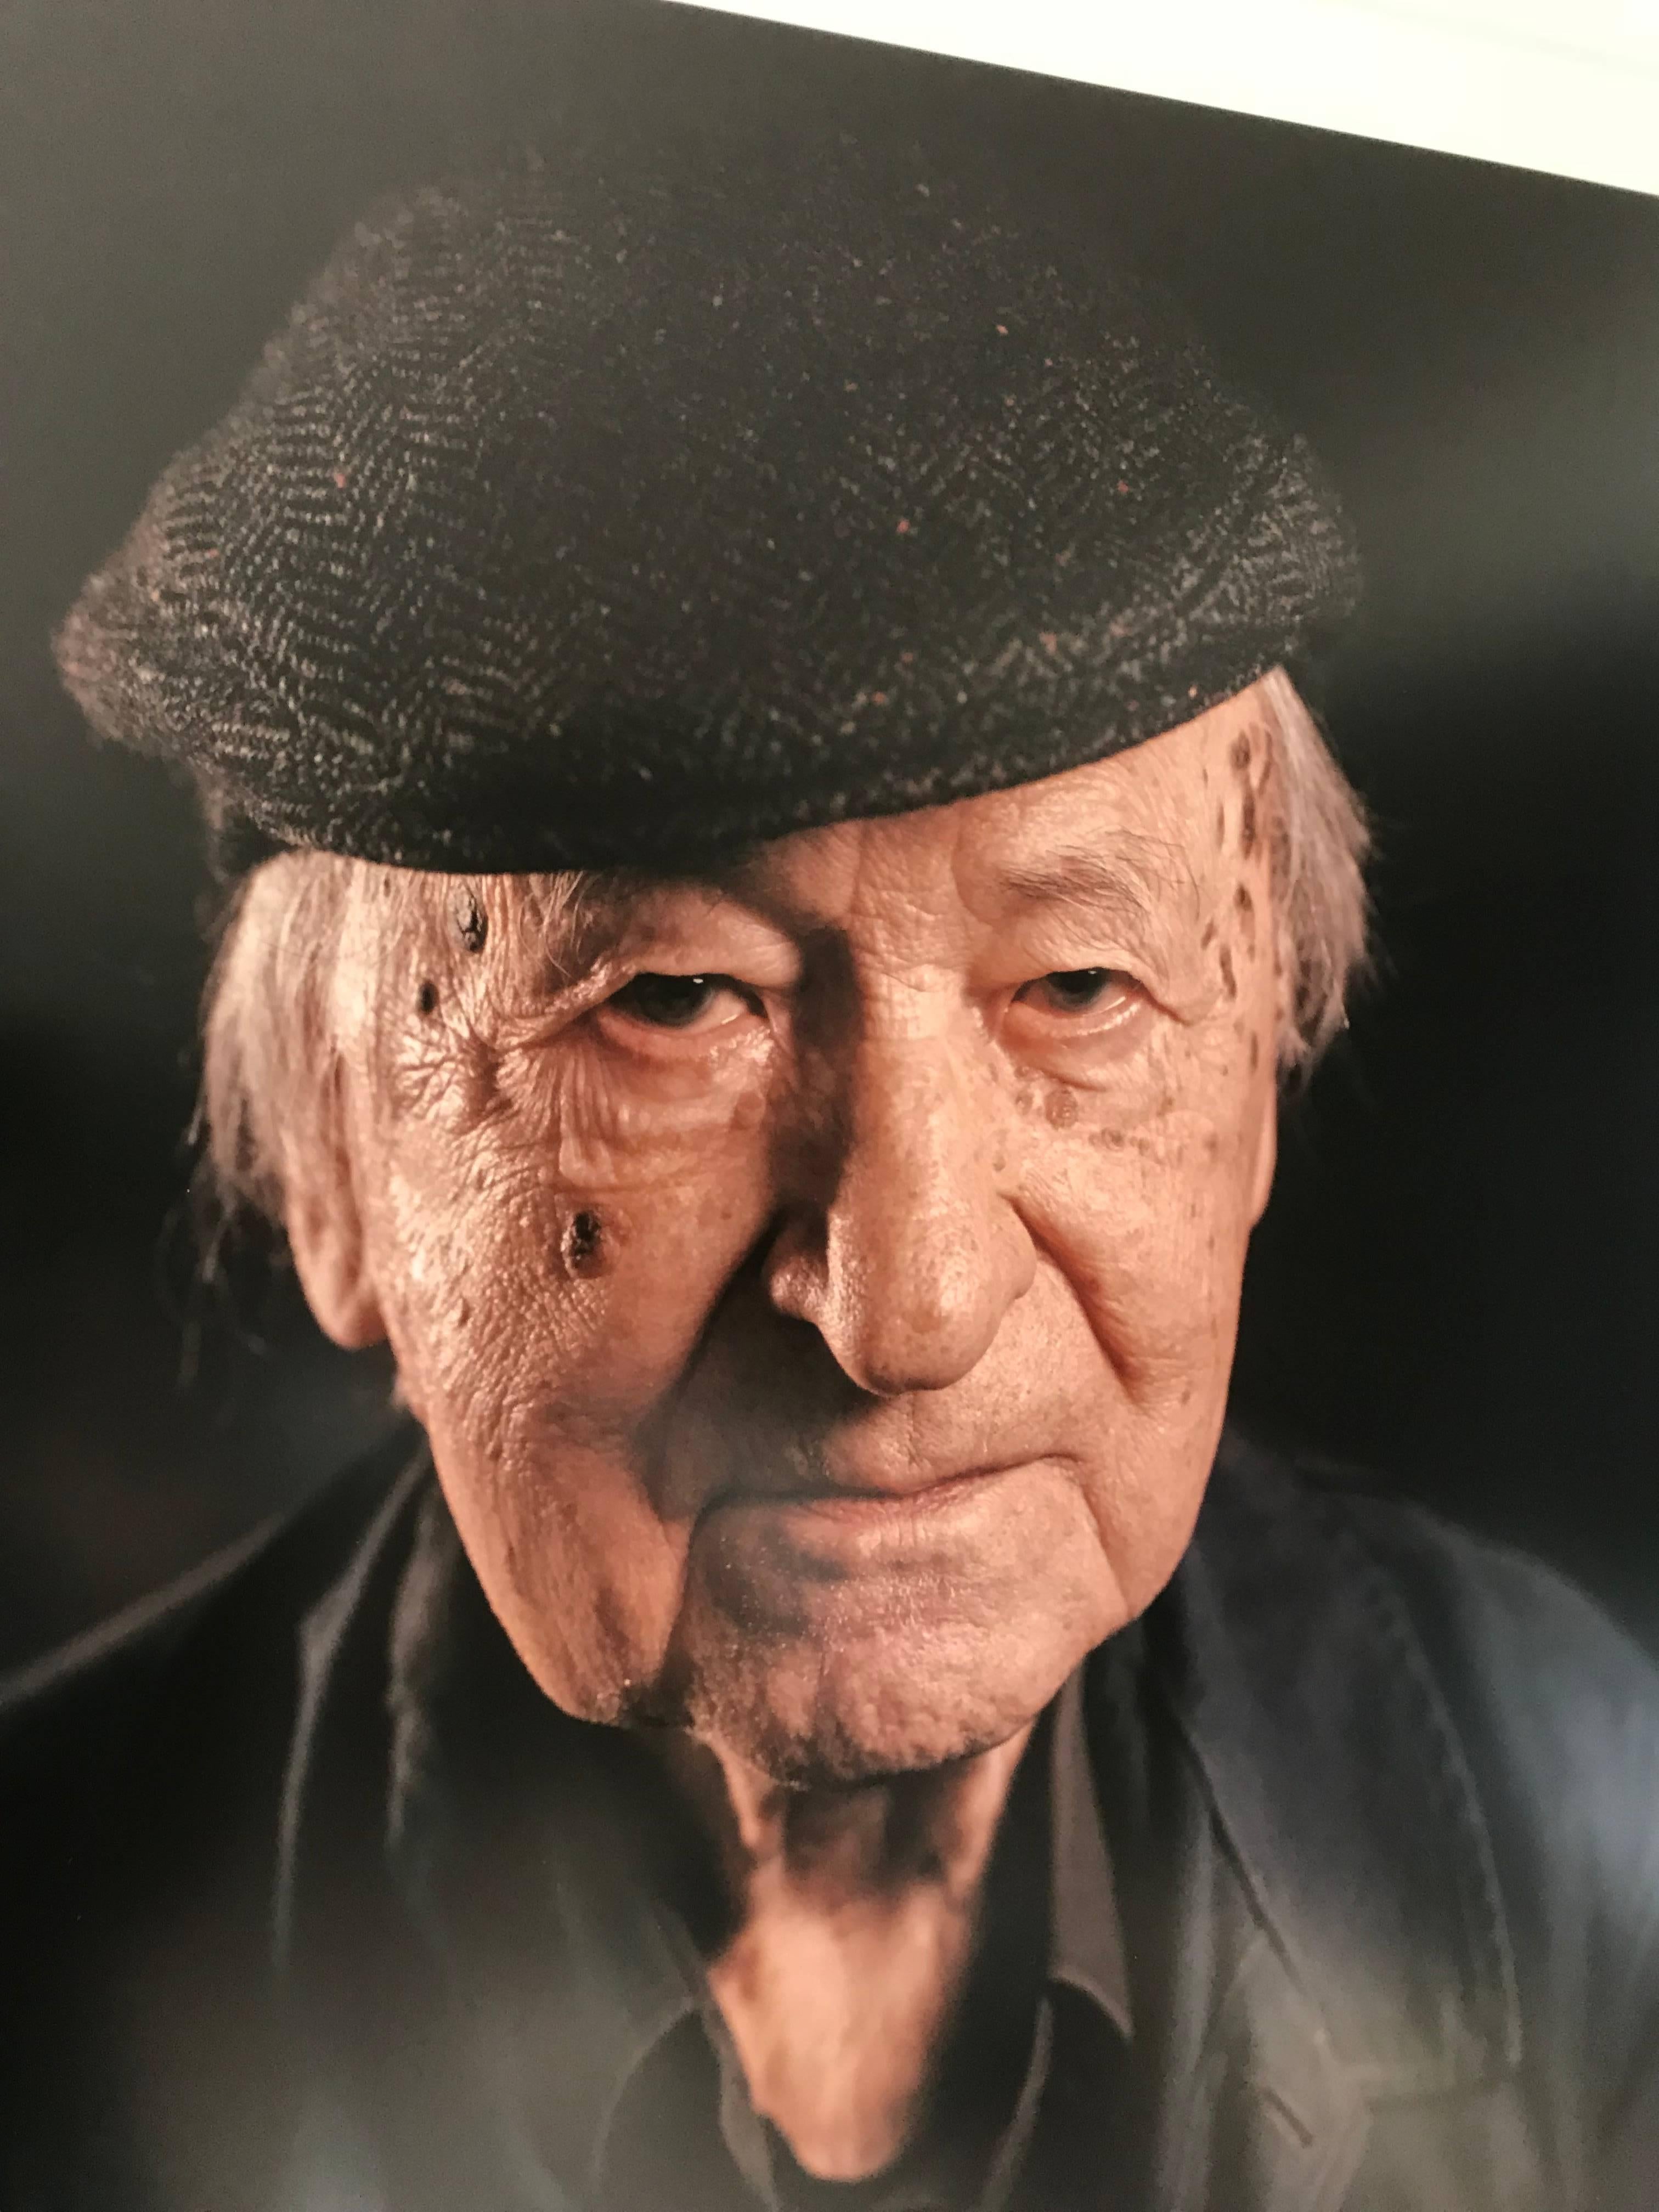 Archival pigment print portrait of Jonas Mekas by Chuck Close. Edition 14/20, 2017. Signed. 
Mekas is a lithuanian filmmaker and artist often known as the godfather of American Avent Garde cinema. Print measures 30